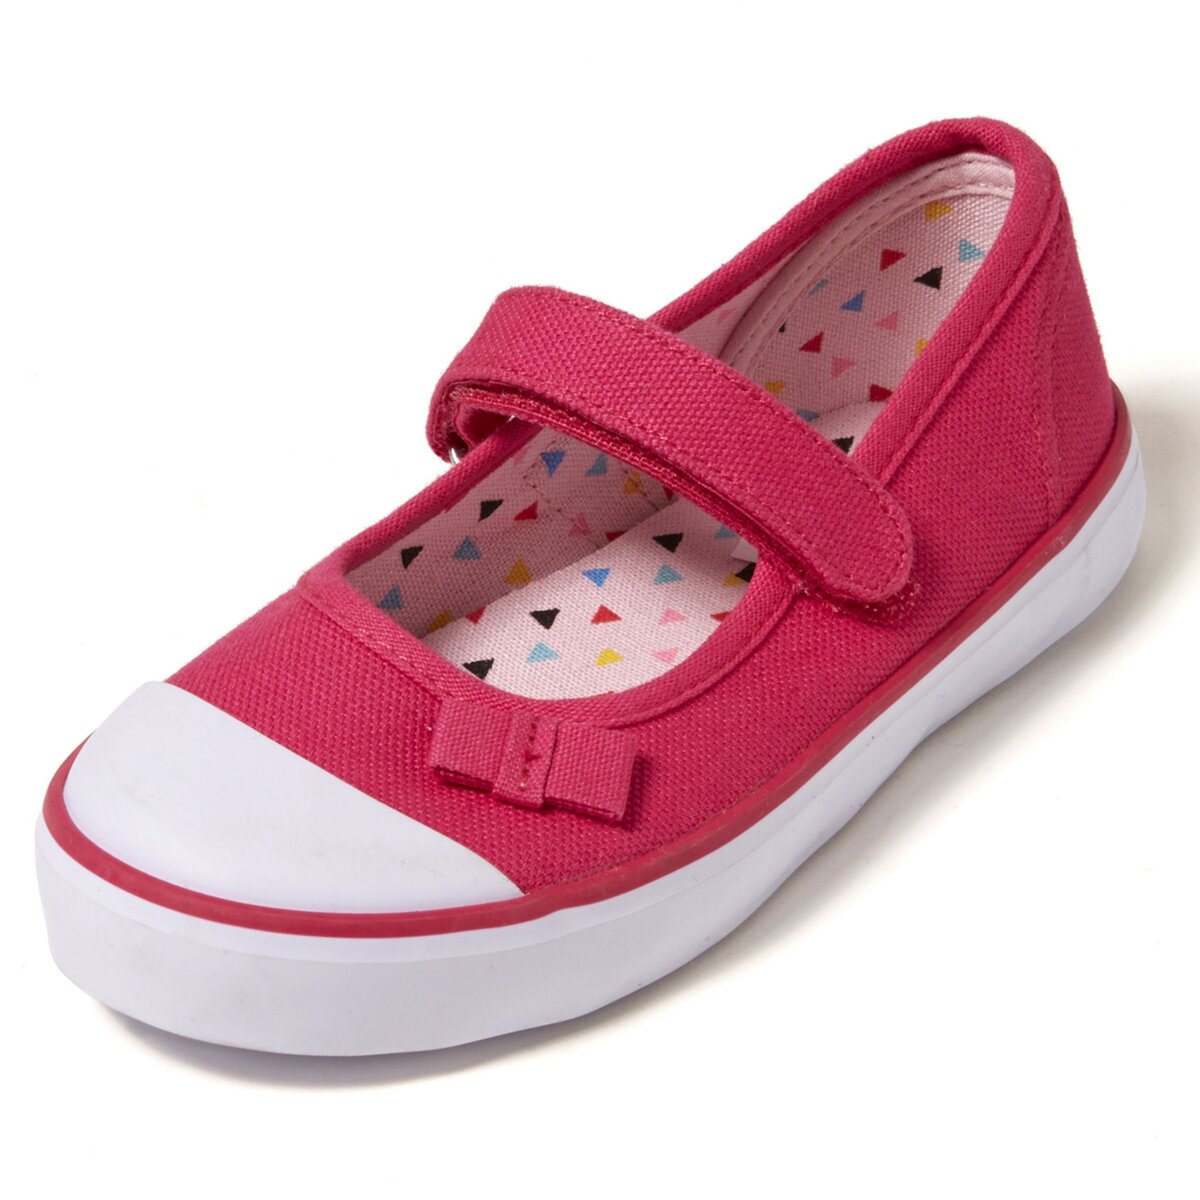 IN EXTENSO Chaussures en toile fille